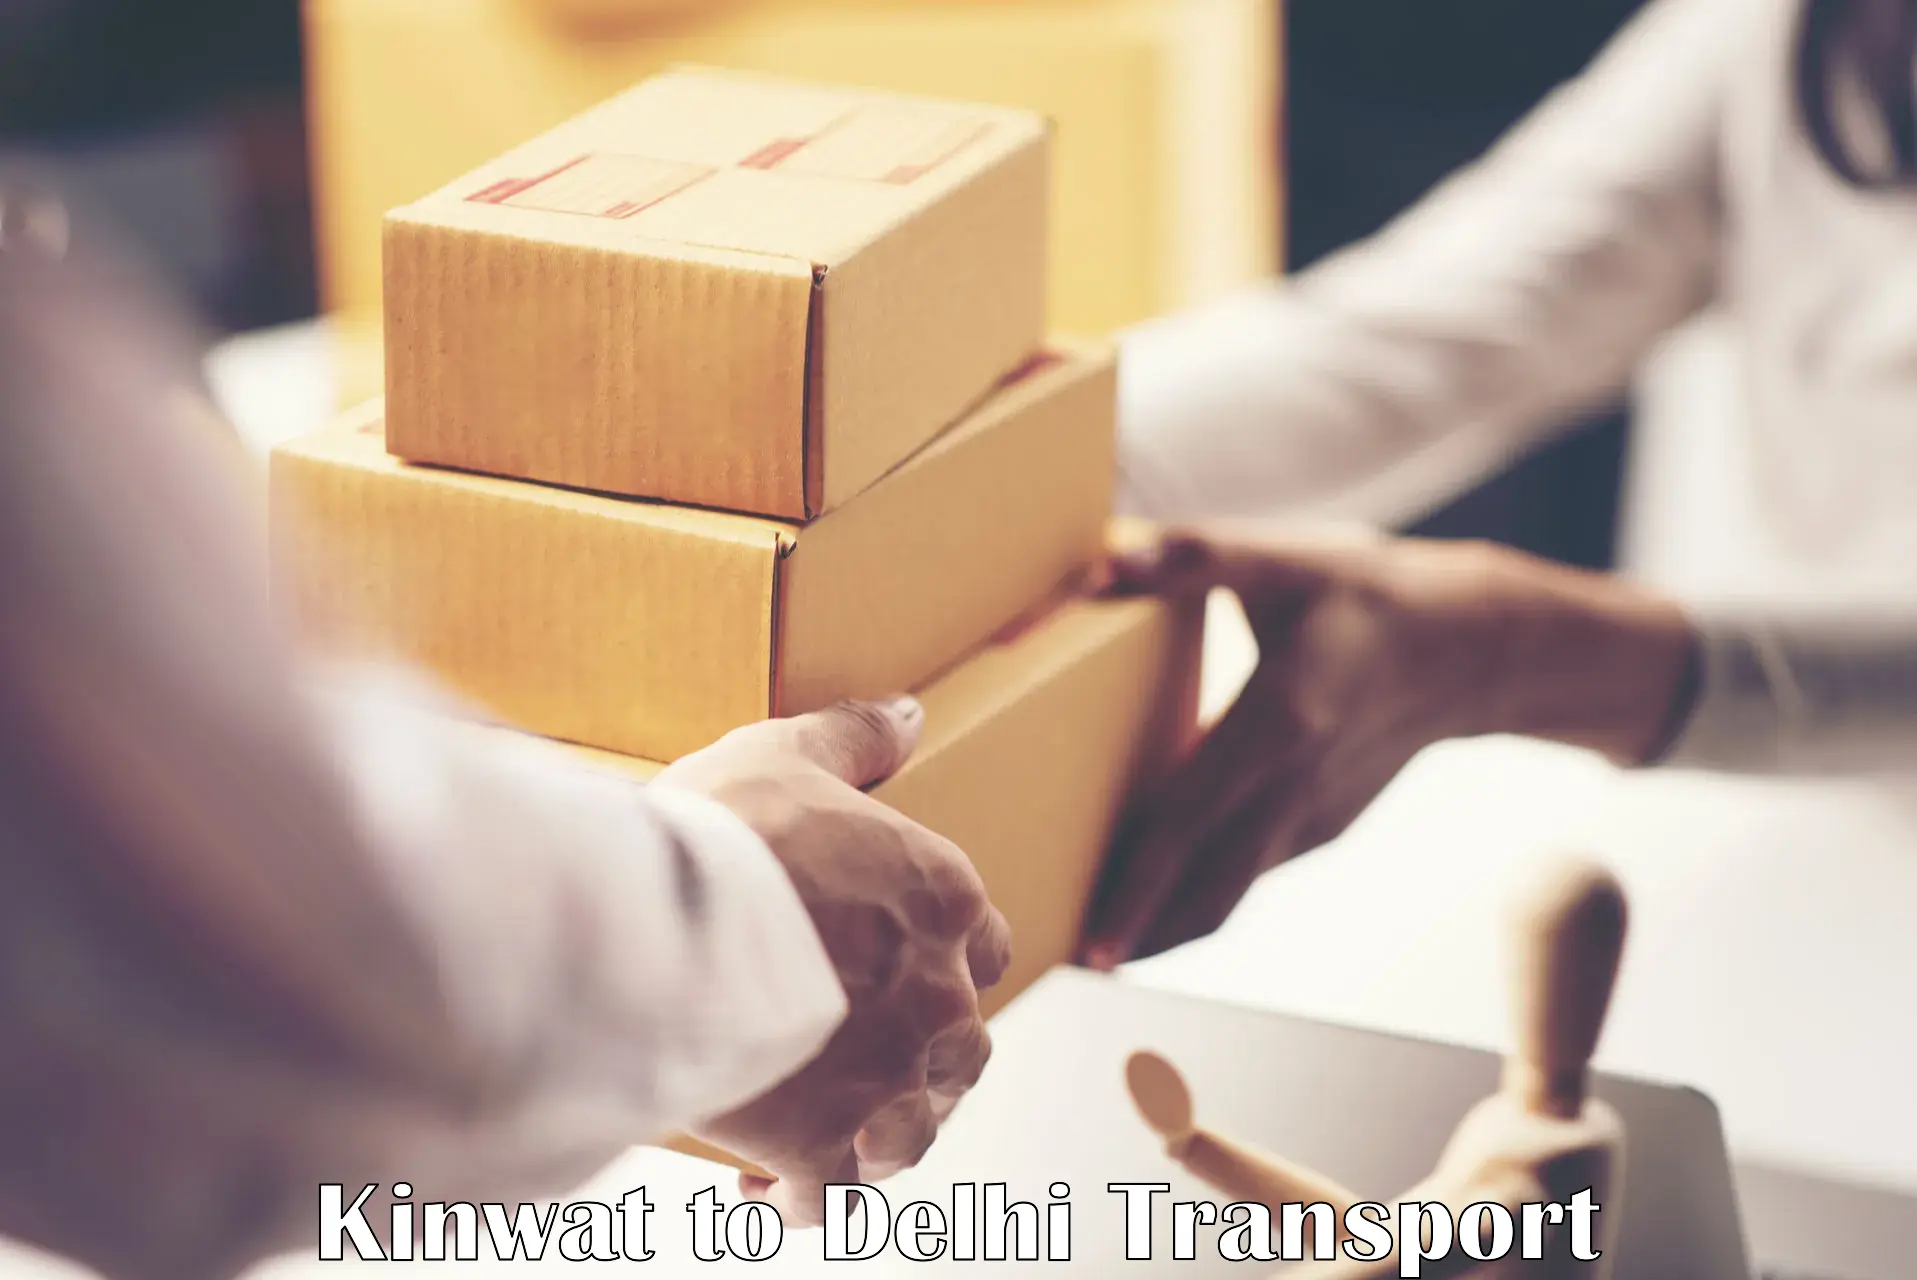 Air freight transport services Kinwat to Delhi Technological University DTU